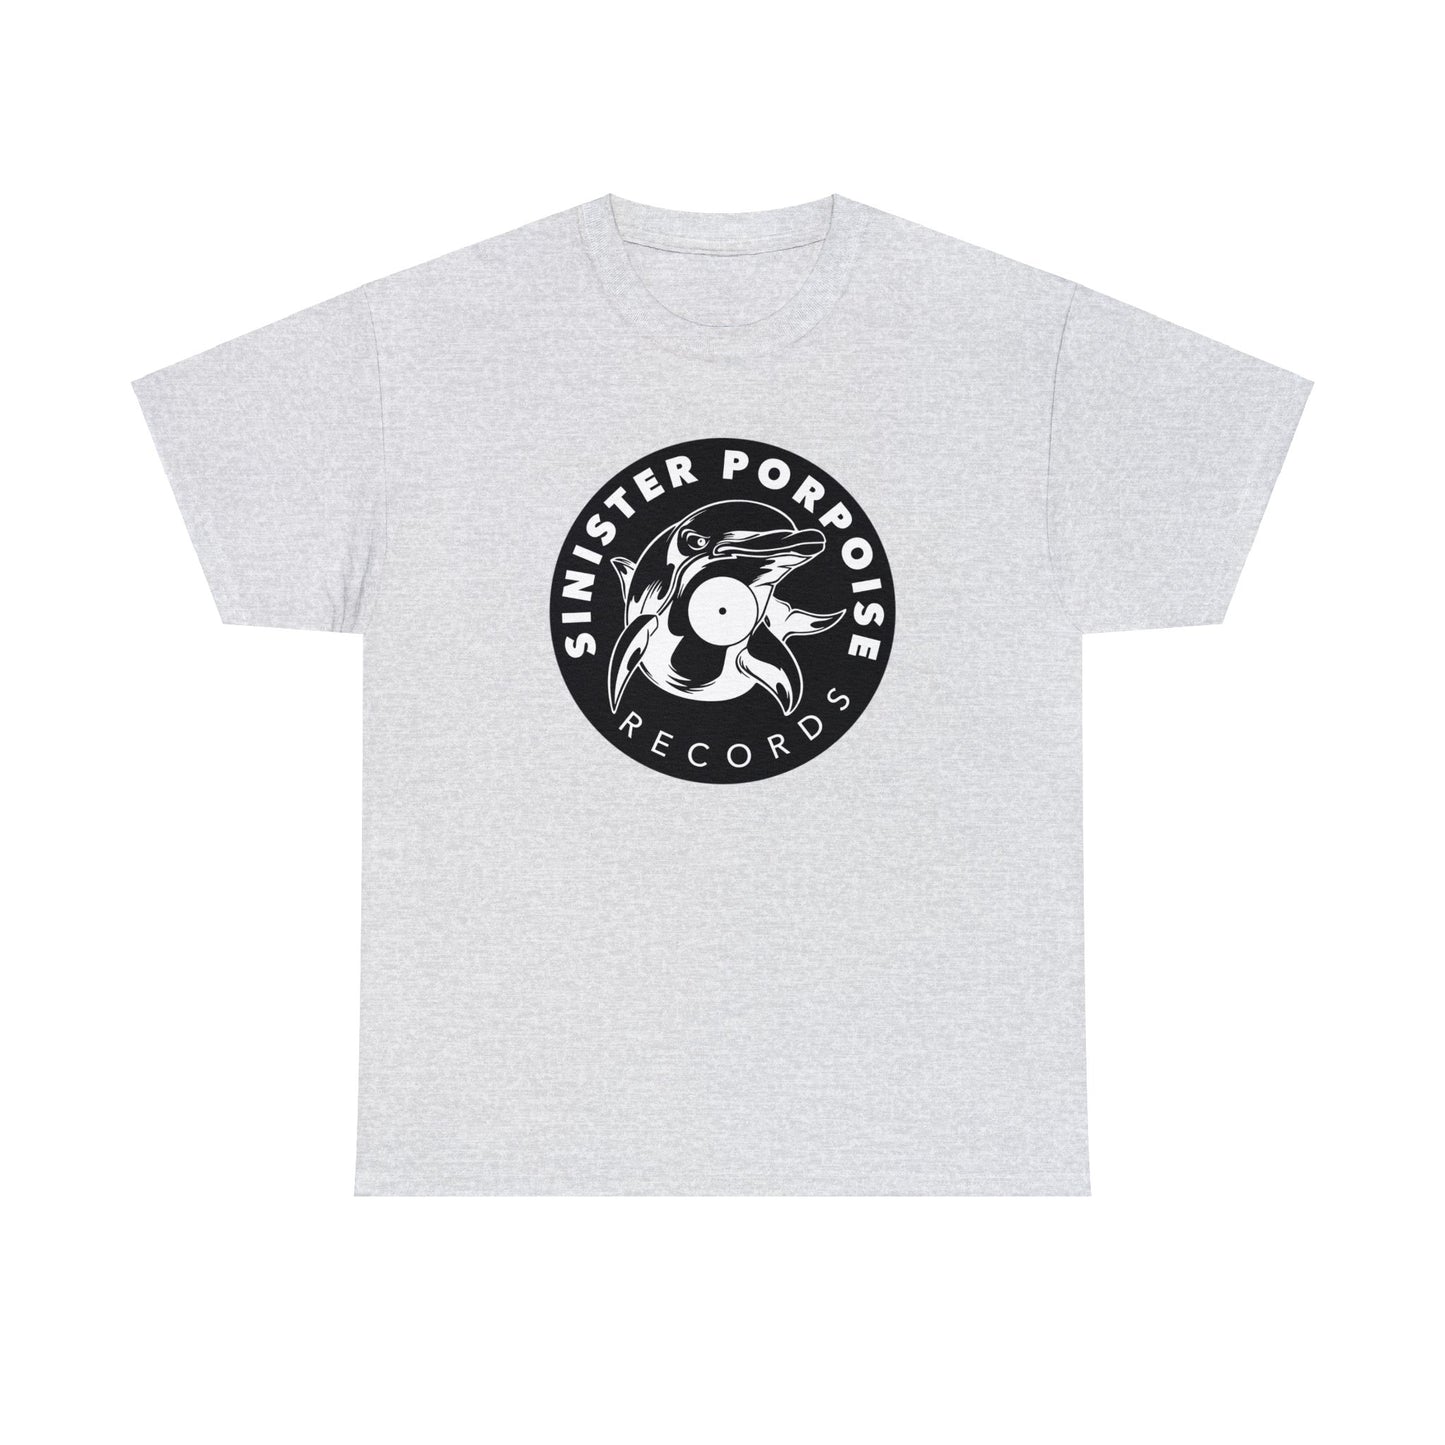 Sinister Porpoise Records - Heavy Cotton Tee